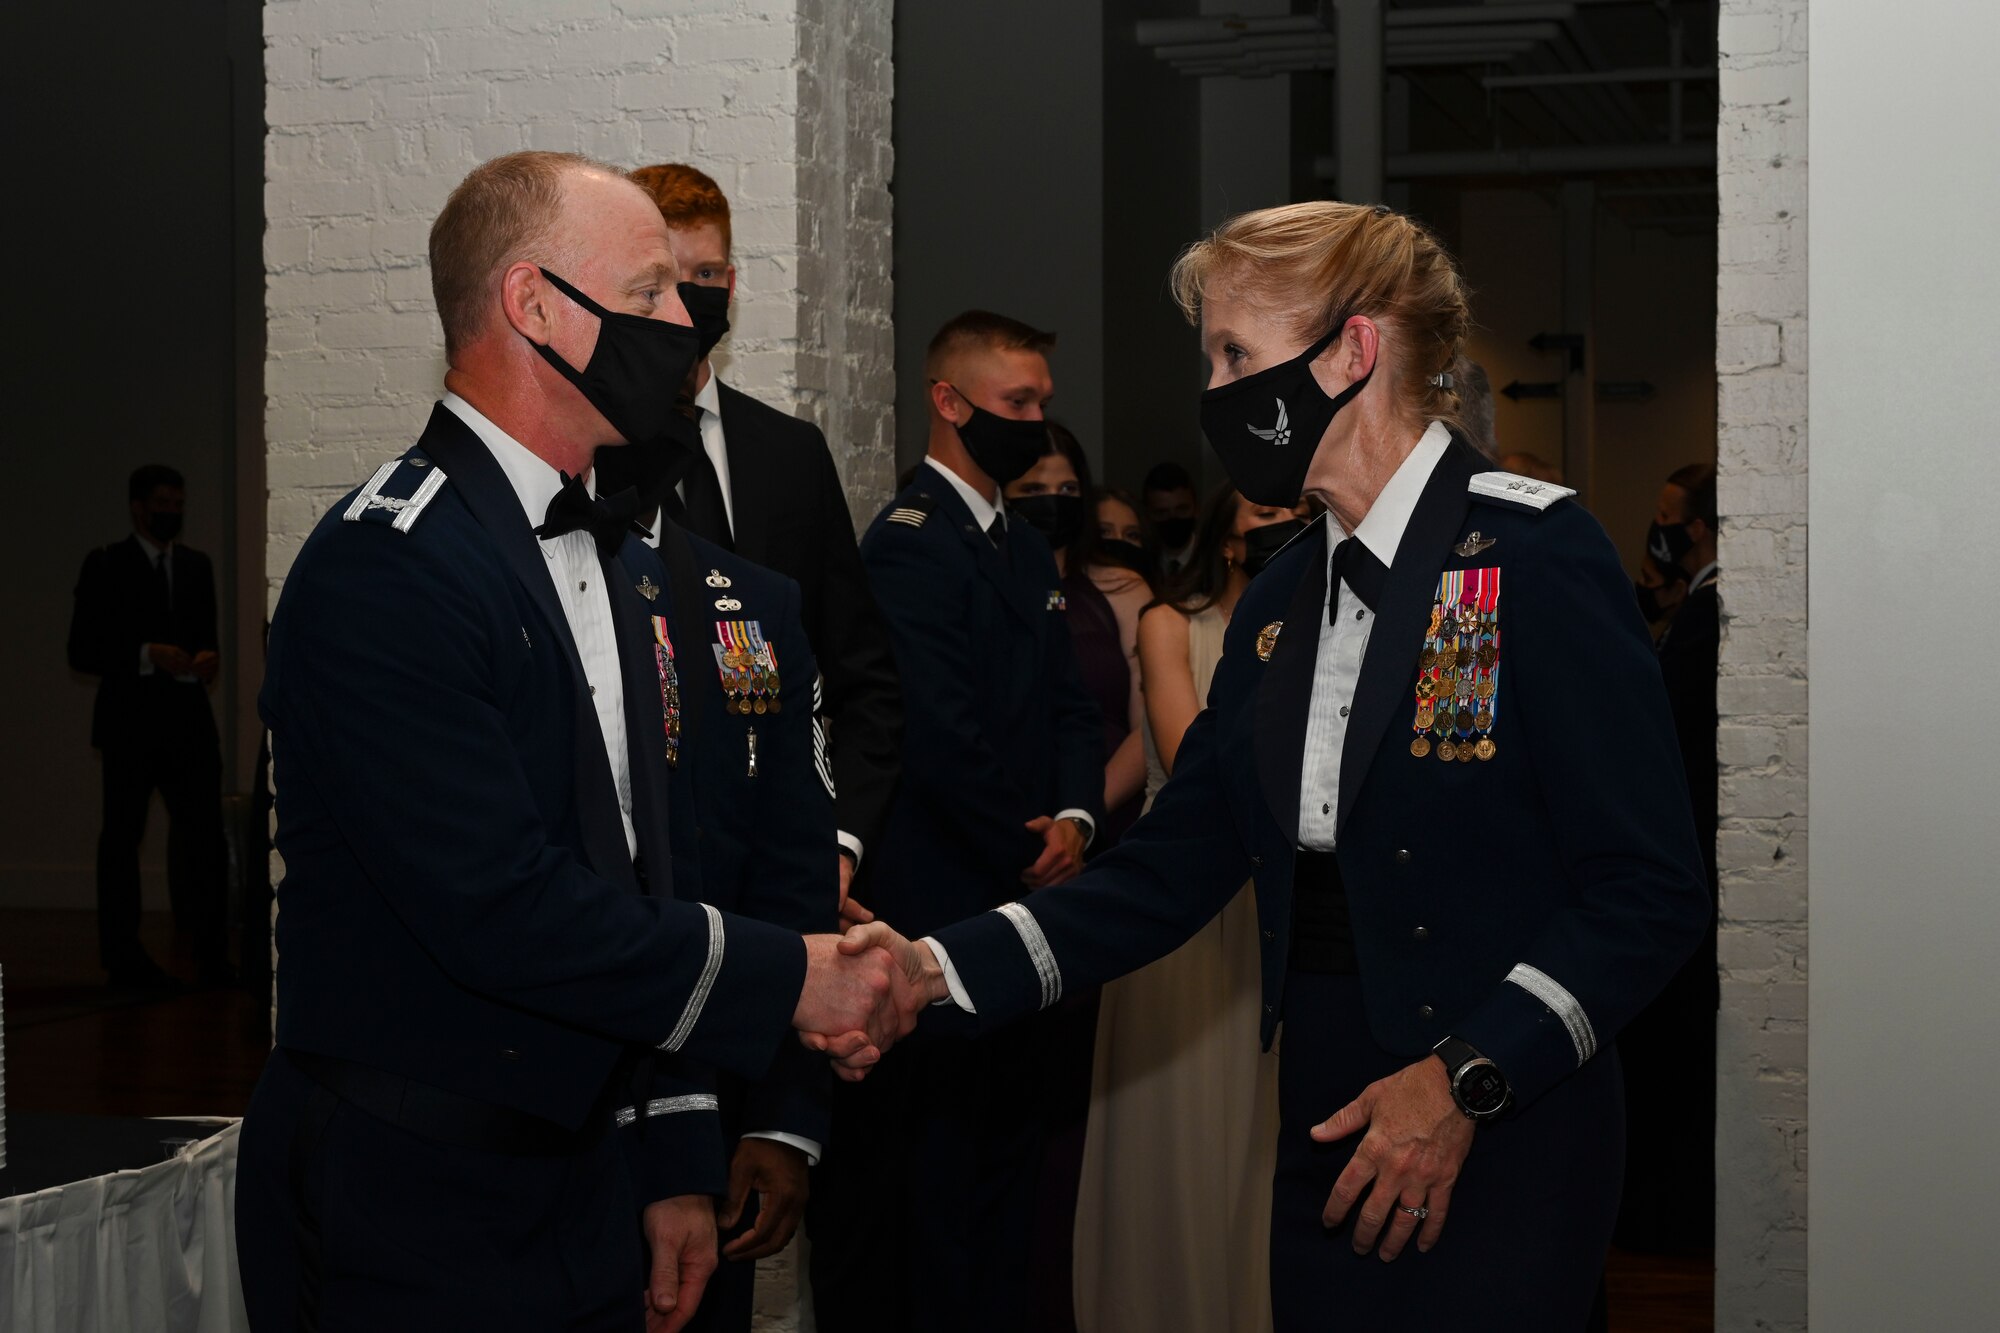 U.S. Air Force Maj. Gen. Jeannie Leavitt, Department of the Air Force chief of safety, Headquaters U.S. Air Force Arlington, VA., and Air Force Safety Center commander, Kirtland Air Force Base, NM., greets Col. Seth Graham, 14th Flying Training Wing commander, during a formal evening event hosted by the Mississippi State University, United States Air Force Detachment 425, , Starkville, Miss. Oct. 13, 2021. Leavitt was commander of the 4th Fighter Wing, Seymour Johnson AFB, N.C., in 2012, making her the first woman to command a United States Air Force combat fighter wing. (U.S Air Force photo by Airman 1st Class Jessica Haynie)